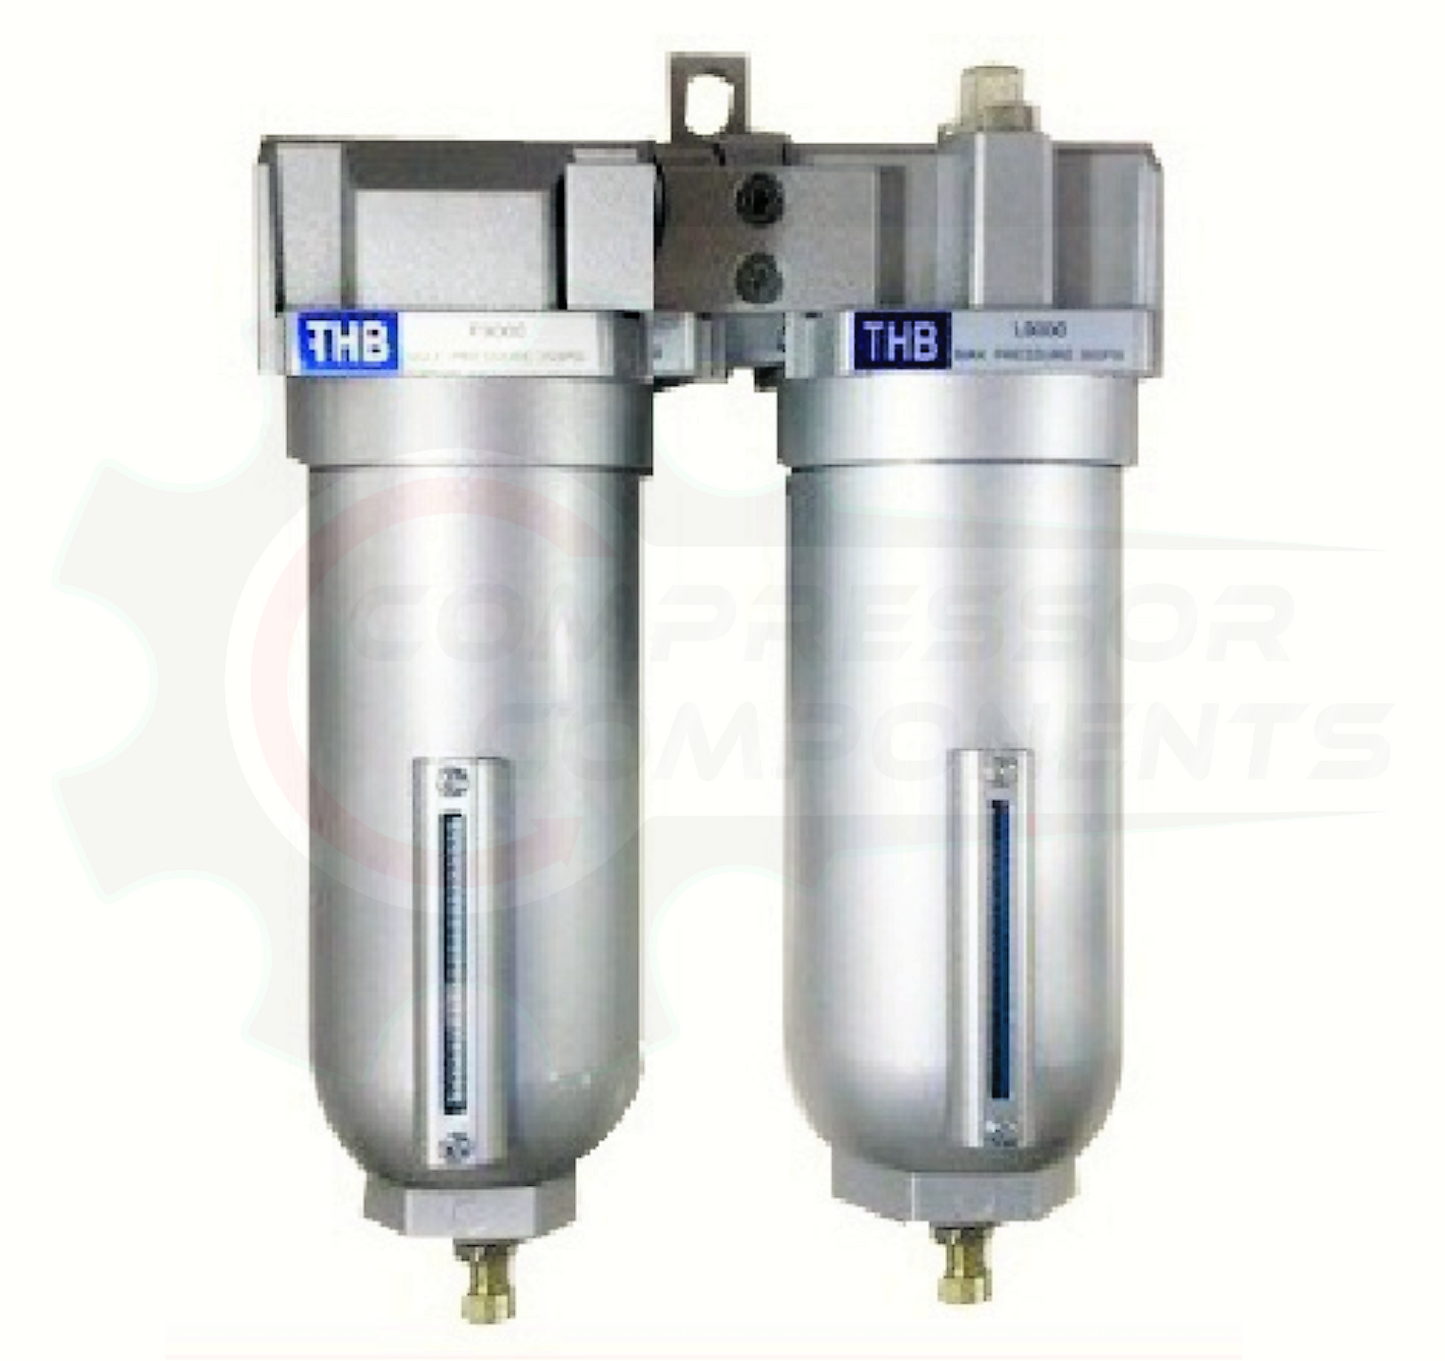 THB F90A-FM968 - 2 STAGE PARTICULATE & COALESCING FILTER COMBO - 1" FNPT / 175 CFM